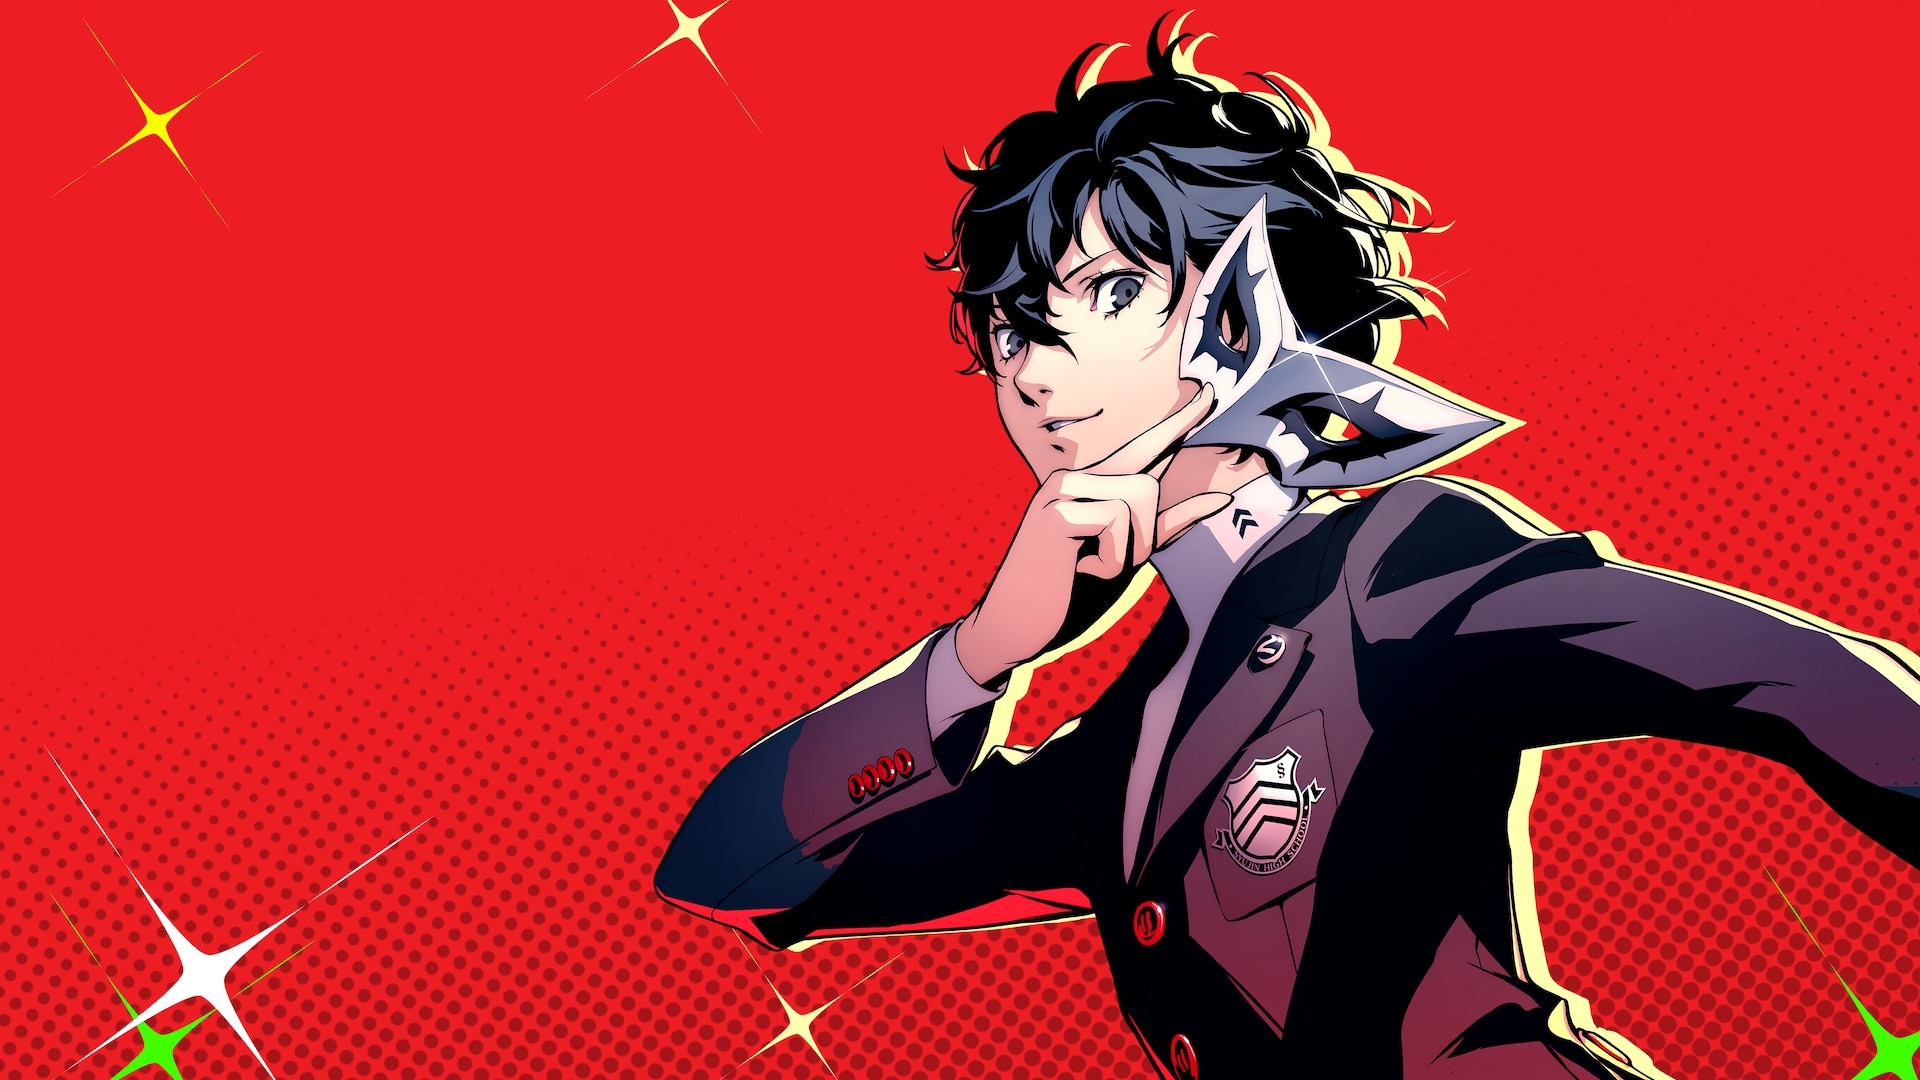 19x Persona 5 Royal Game 19x Resolution Wallpaper Hd Games 4k Wallpapers Images Photos And Background Wallpapers Den